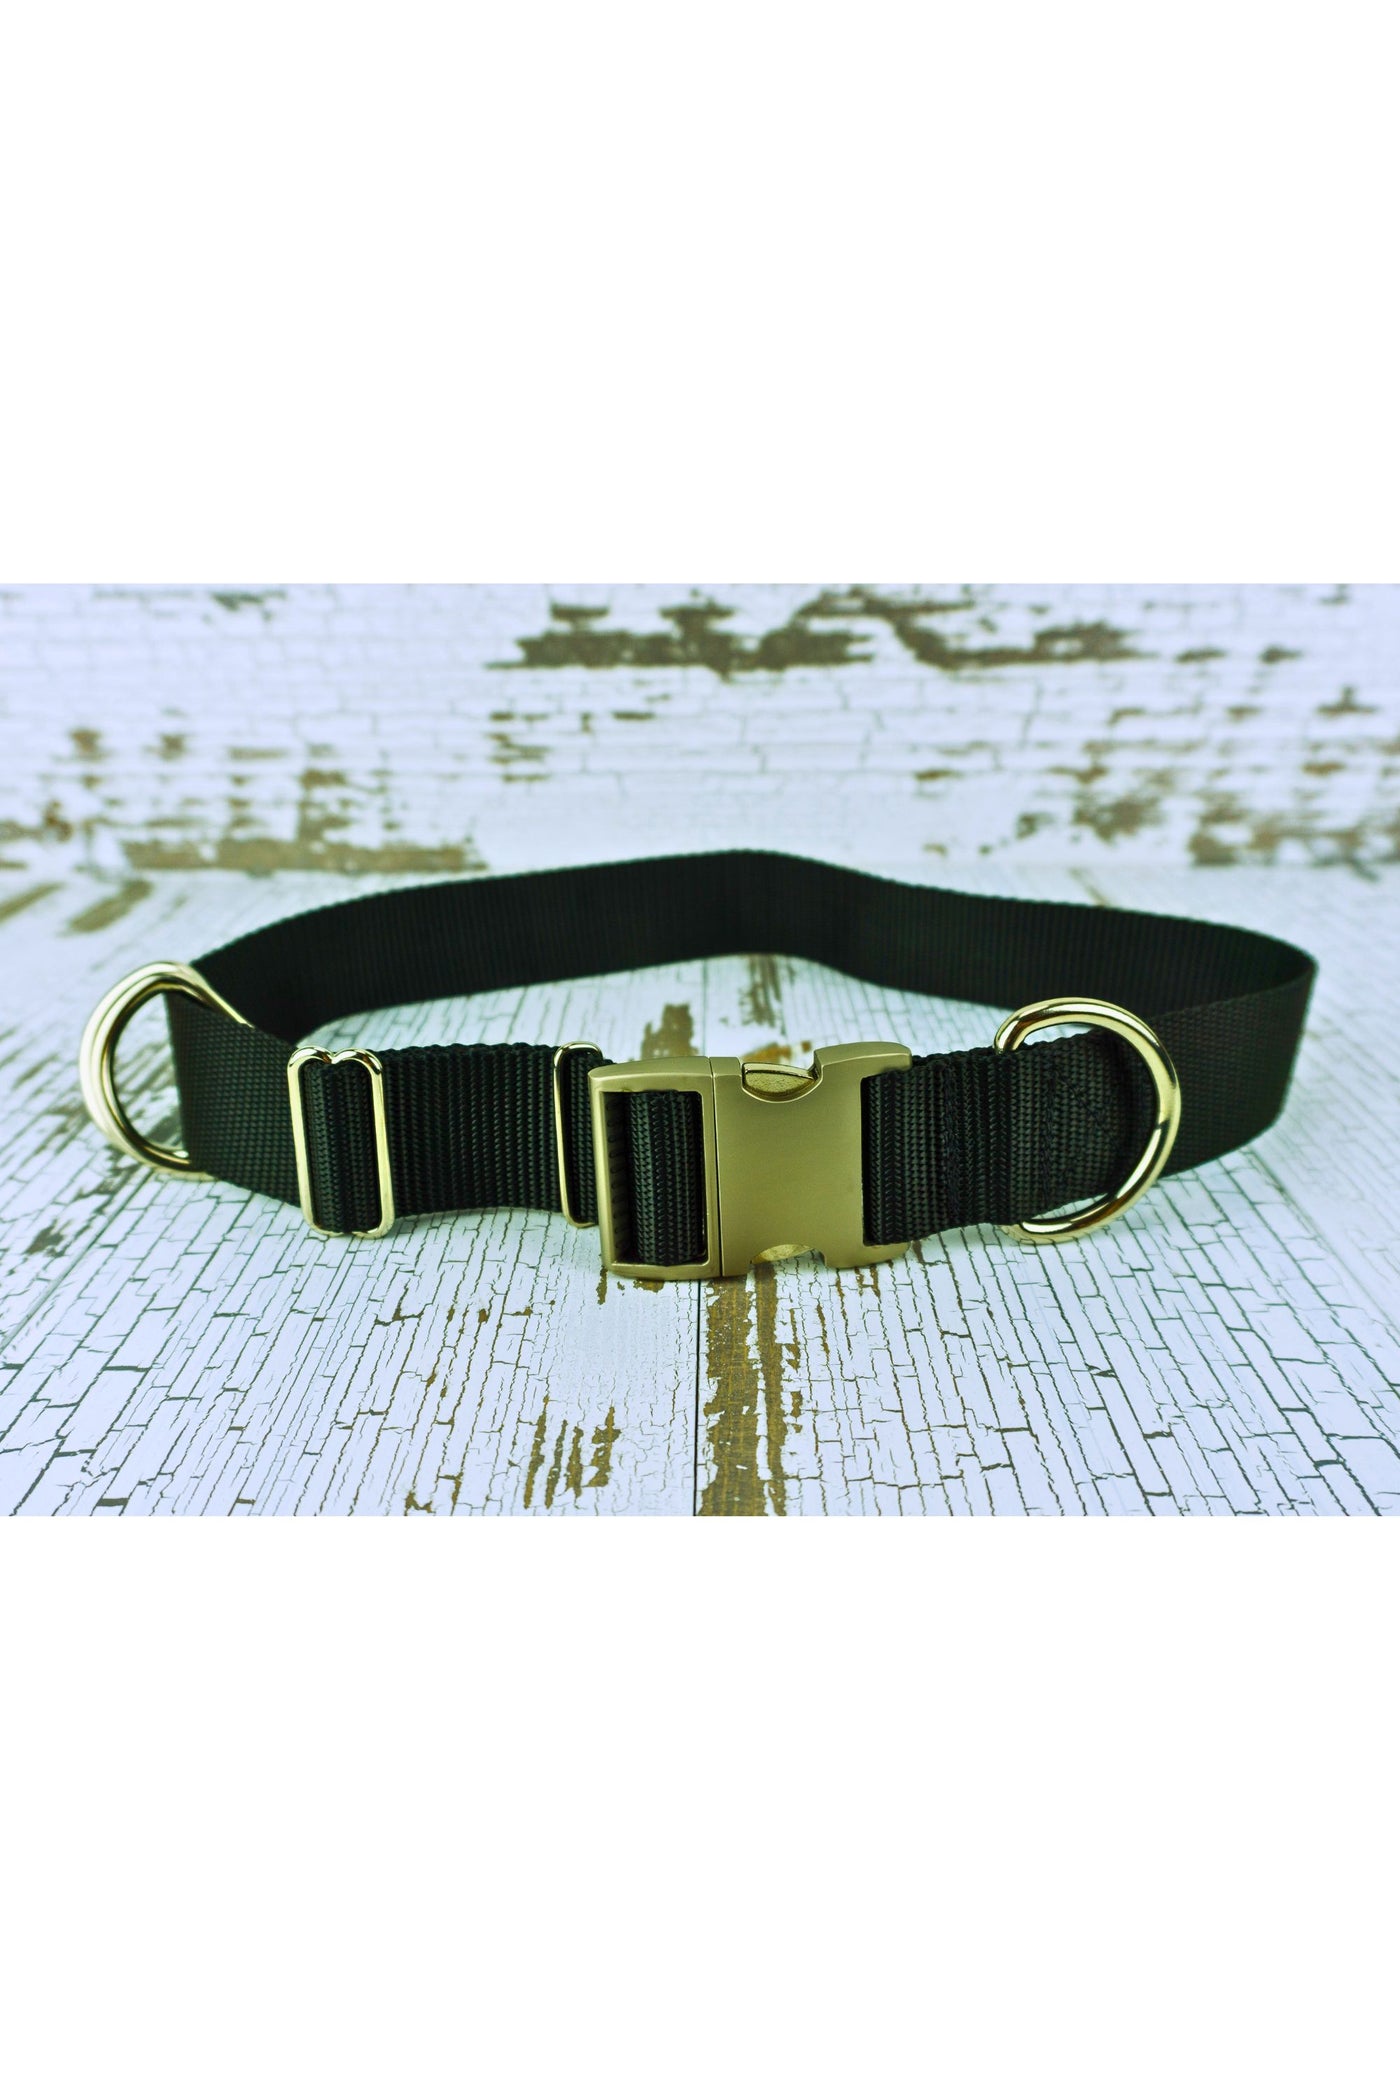 Closeup of the black webbing heavy duty hands free leash belt showing the silver aluminum buckle, the heavy duty d ring fixed next to the buckle, and the two heavy duty floating d rings. The belt also includes a triglide slide and keeper for easy adjustability.